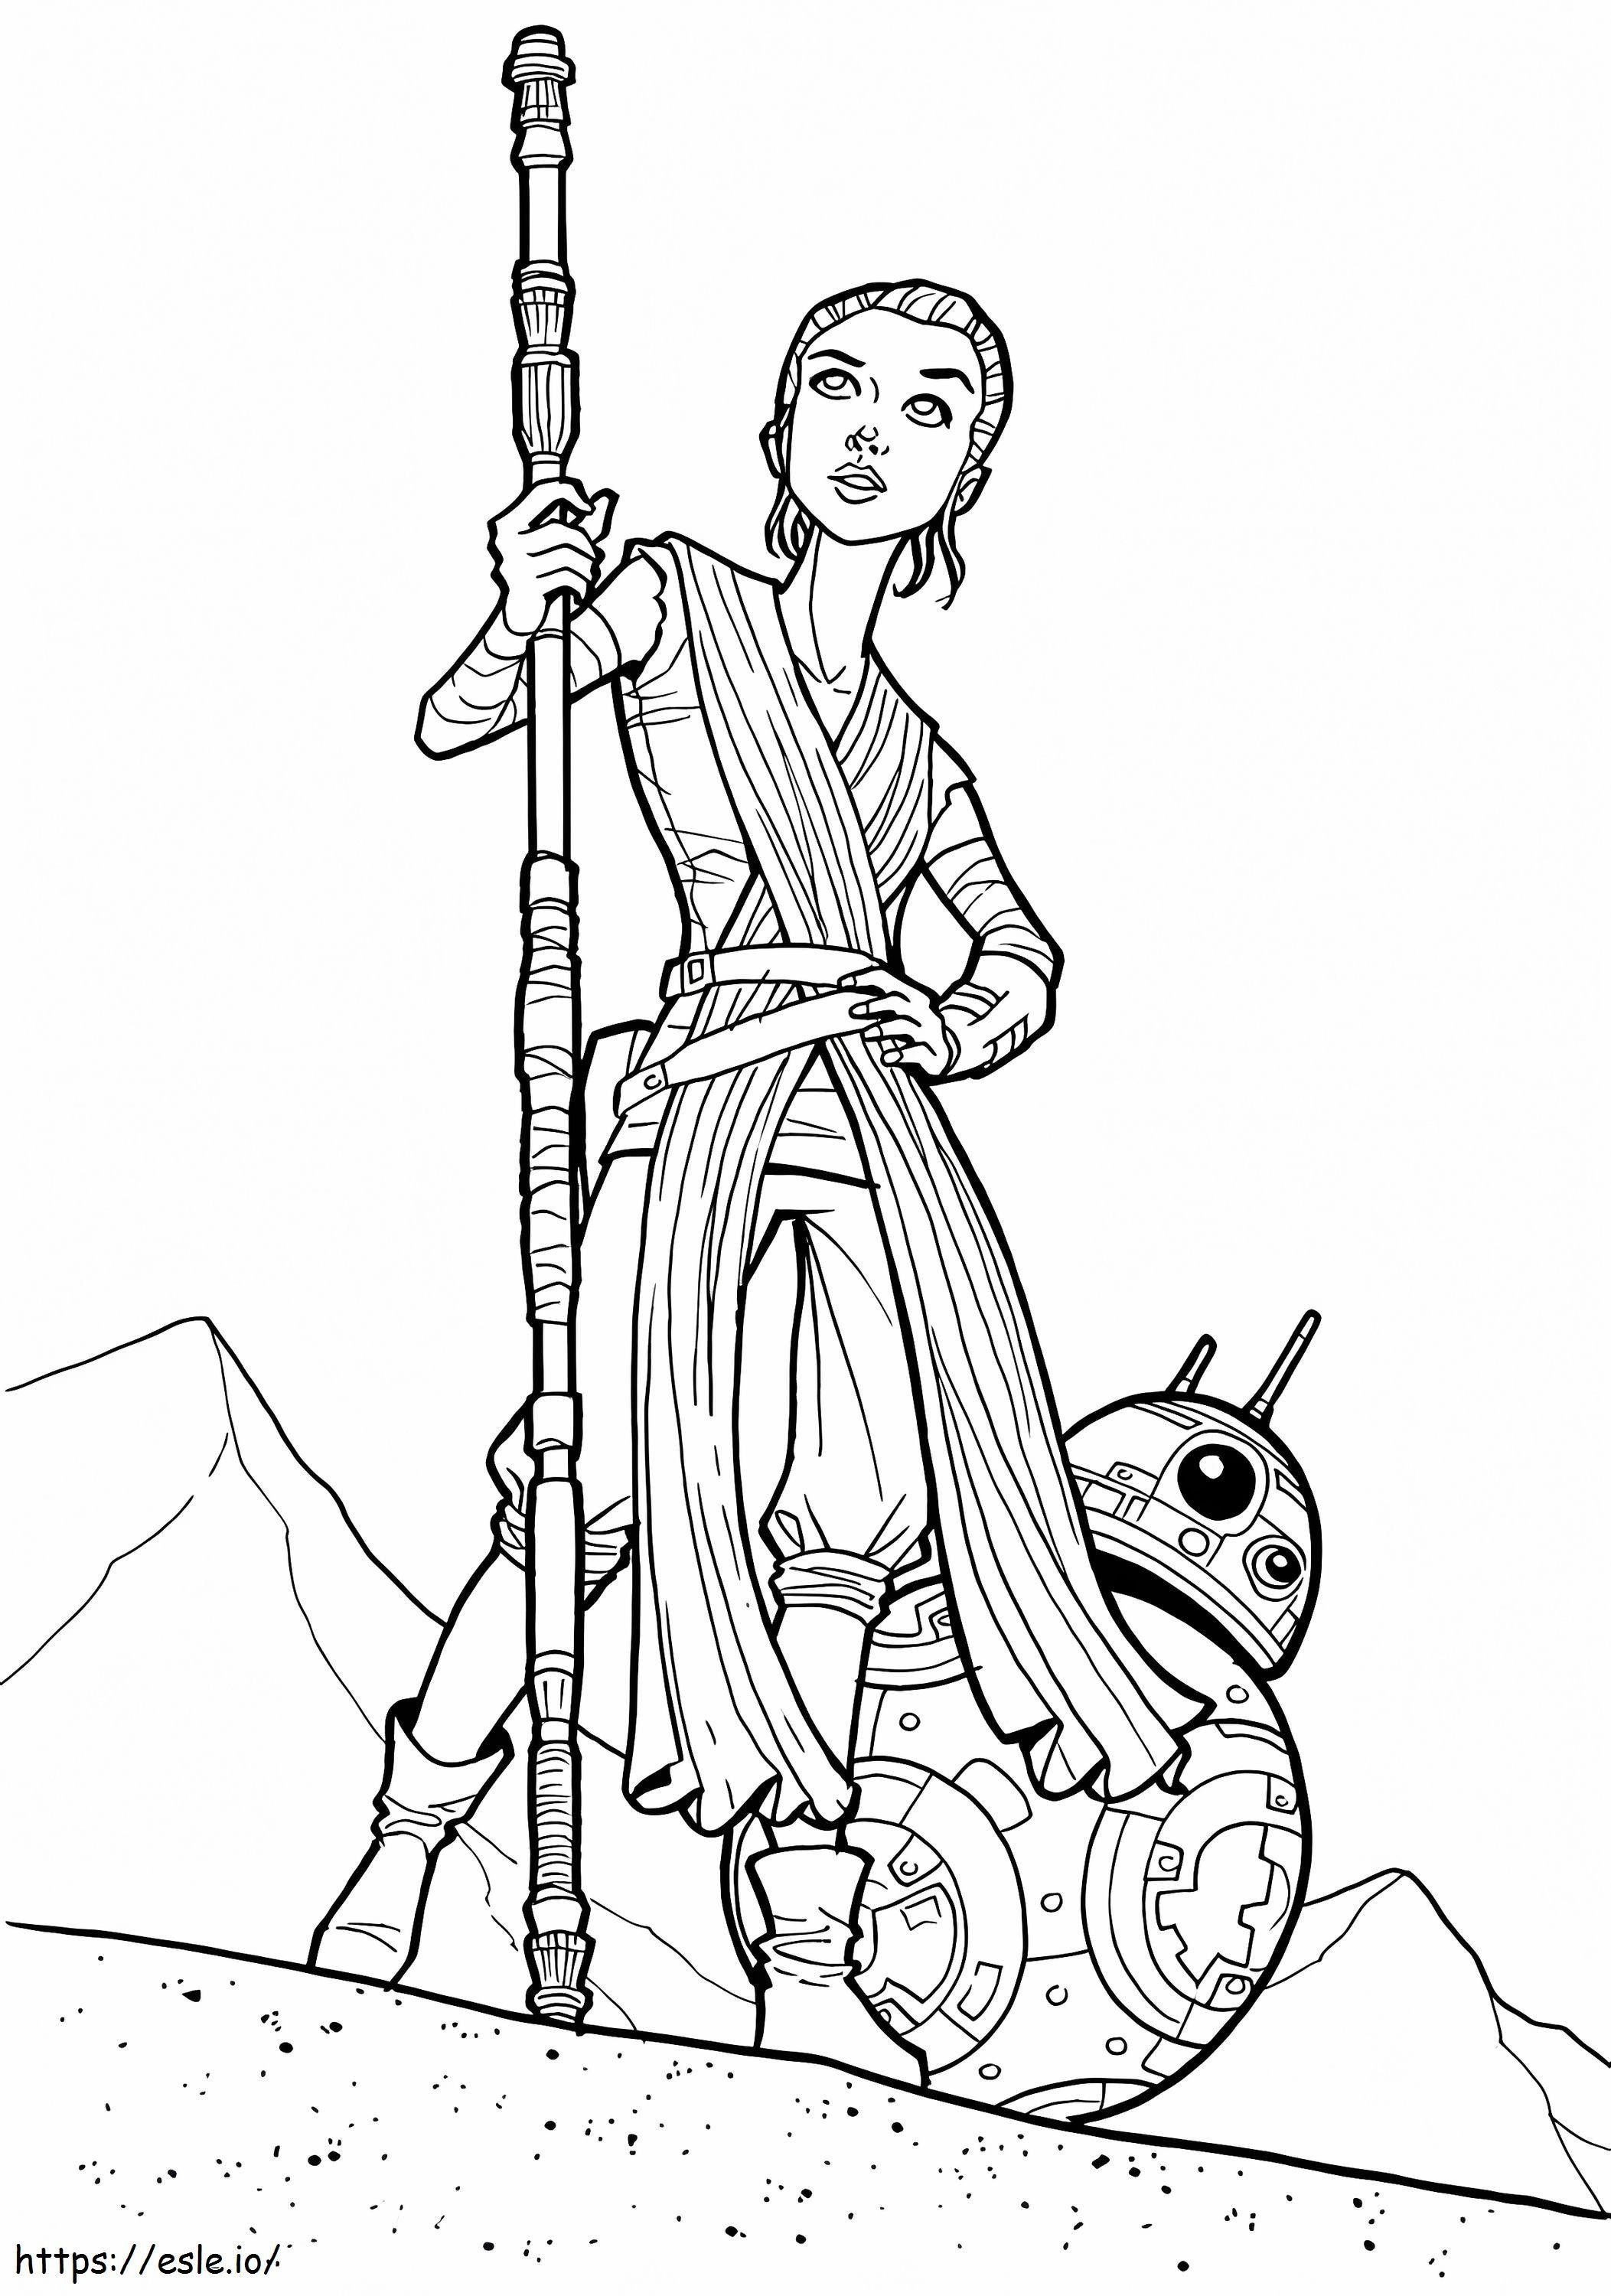 Rey And BB 8 From Star Wars coloring page